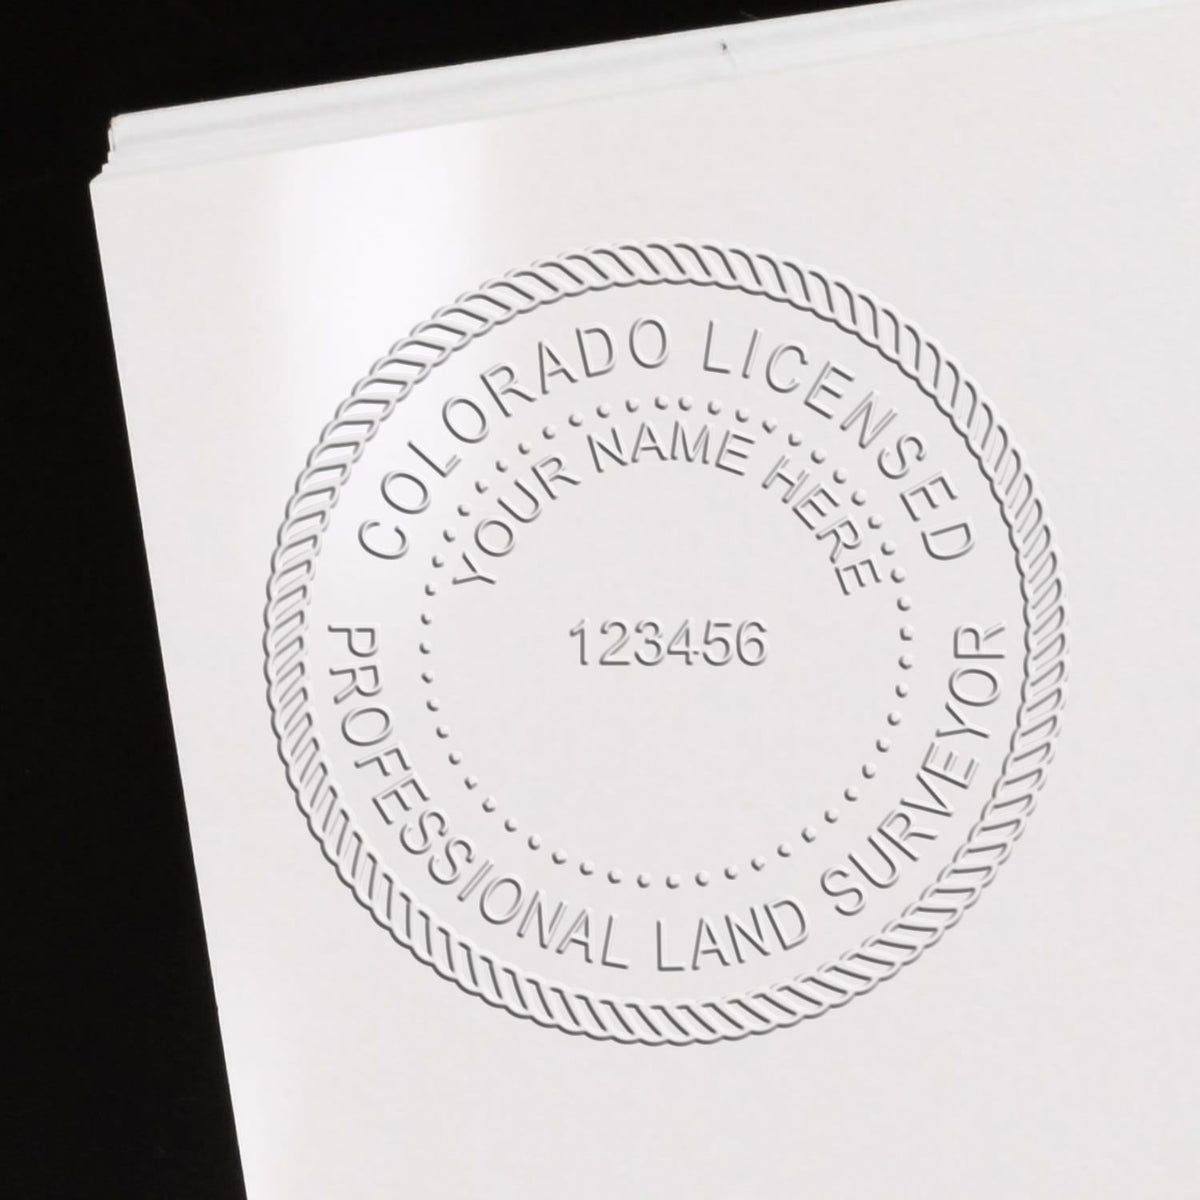 The Gift Colorado Land Surveyor Seal stamp impression comes to life with a crisp, detailed image stamped on paper - showcasing true professional quality.